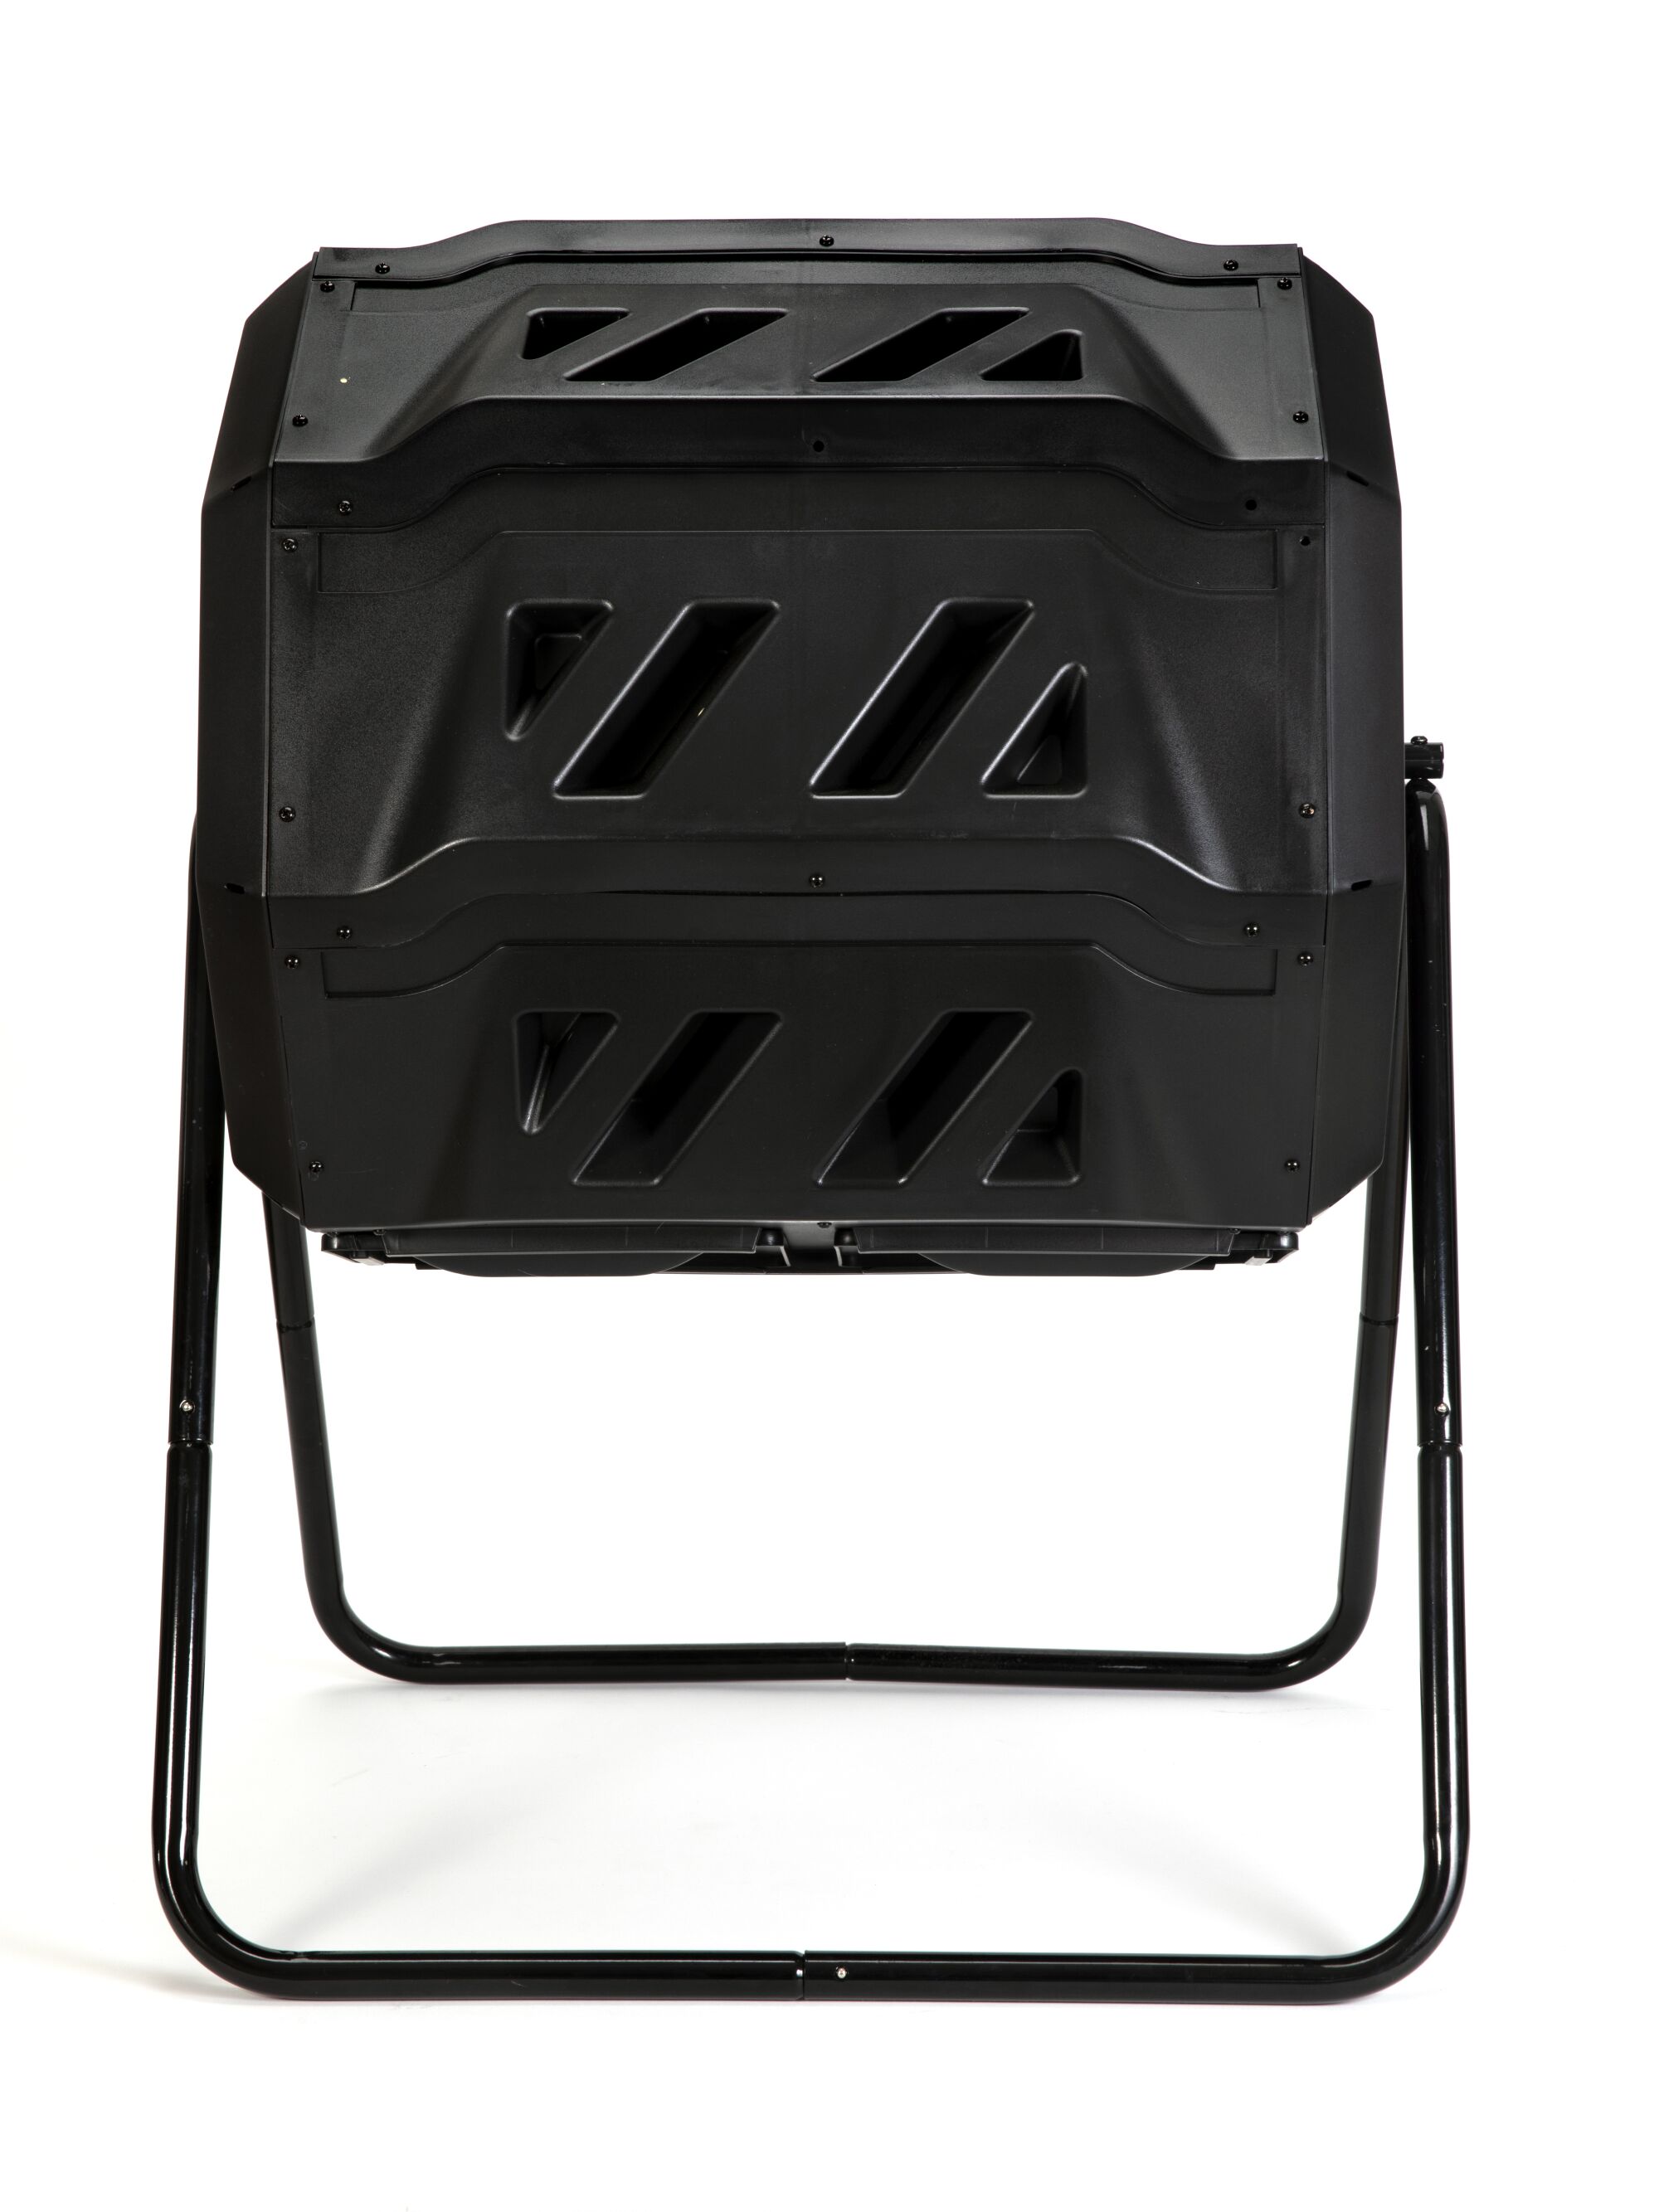 F2C dual chamber tumbler composter 